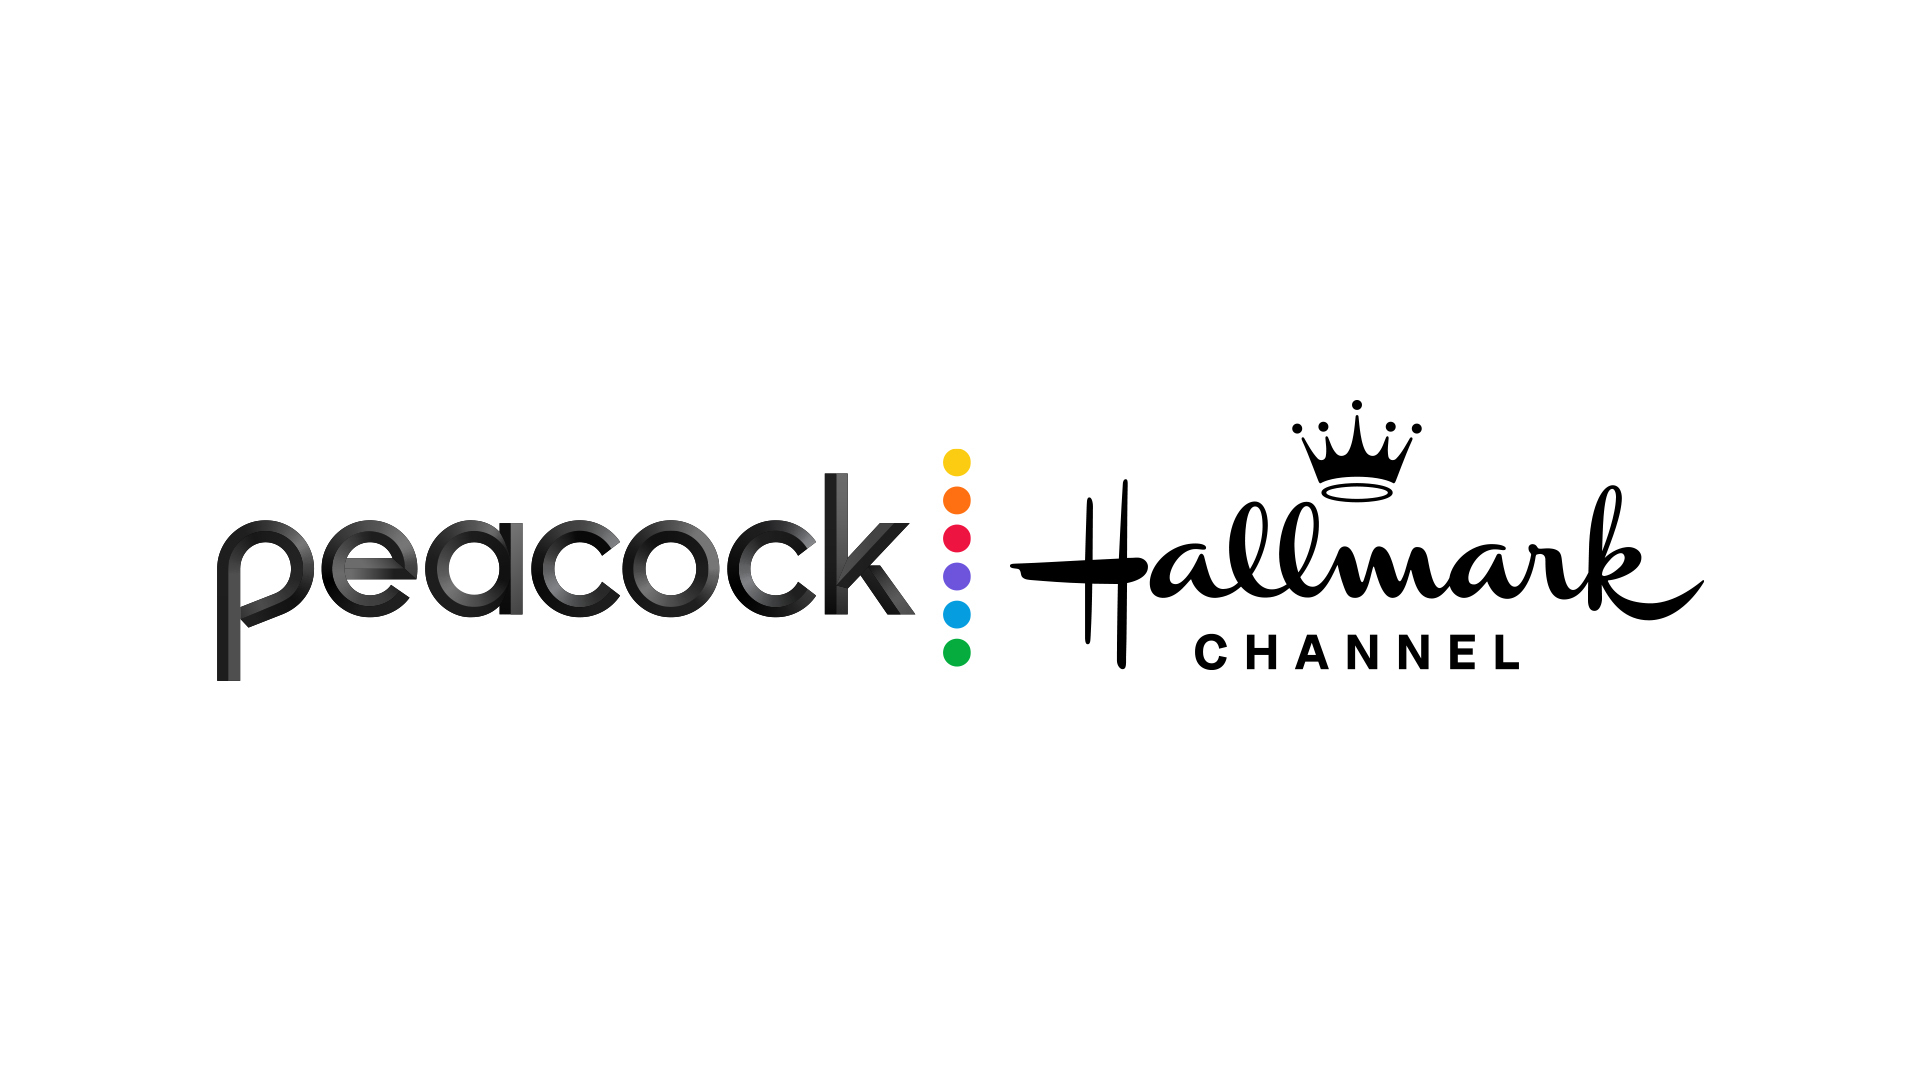 Hallmark Channel on Peacock in New Streaming Deal, Includes Live Channels